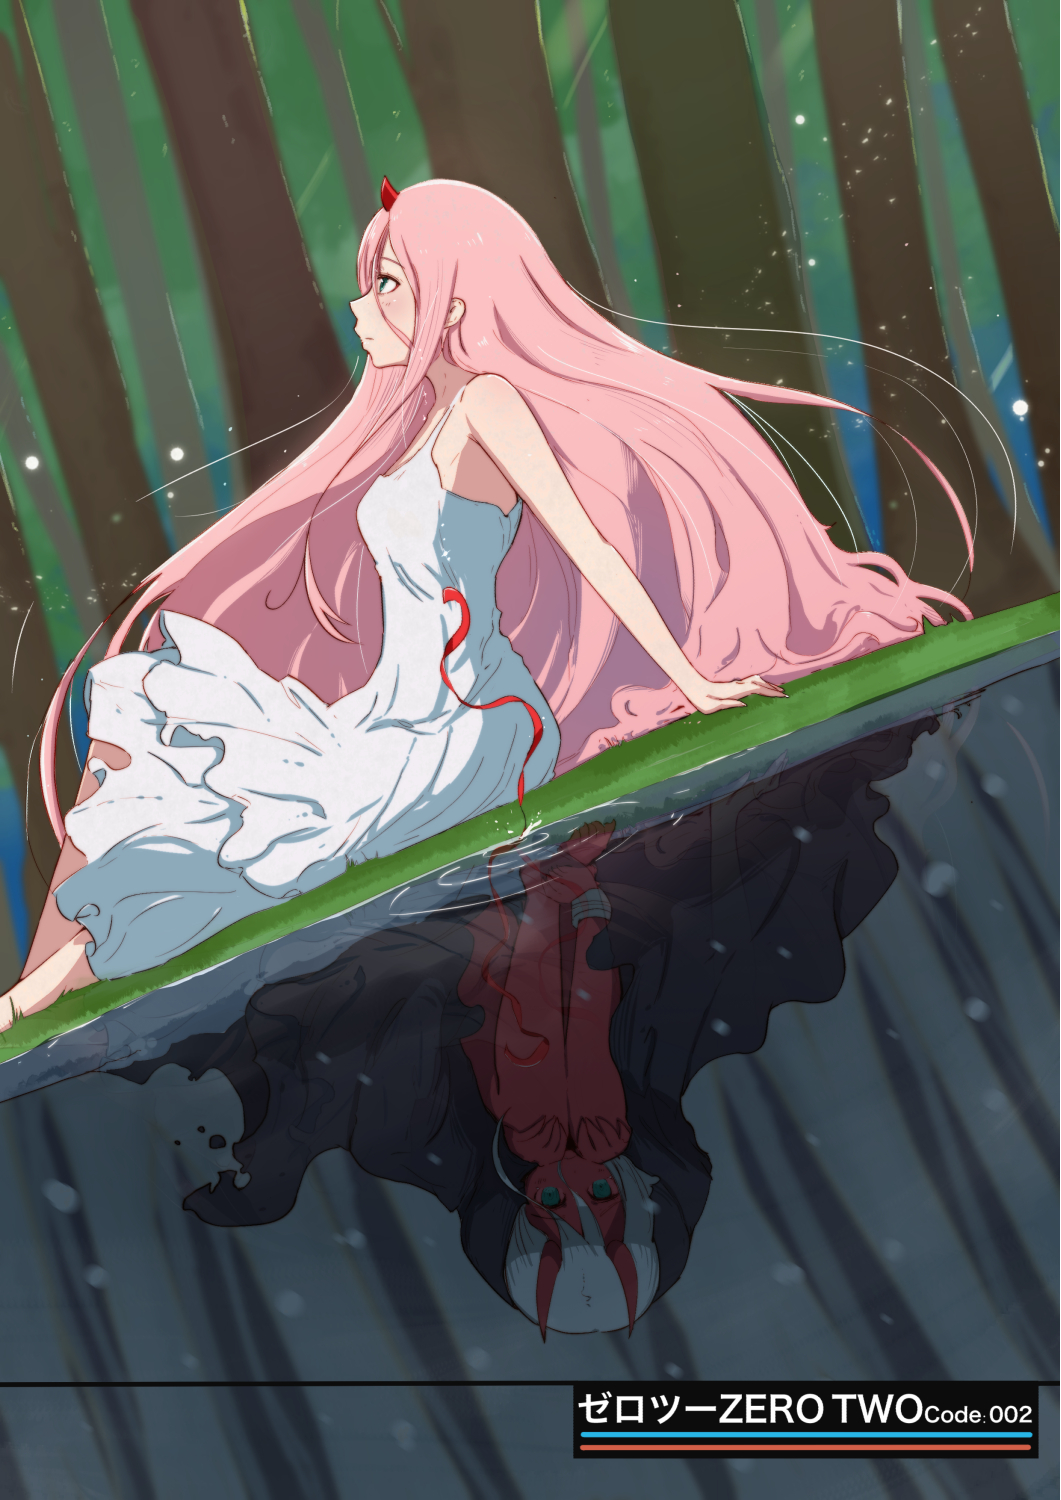 Darling In The FranXX Anime Girls Zero Two Darling In The FranXX White Dress Long Hair 2D Pink Hair  1061x1500